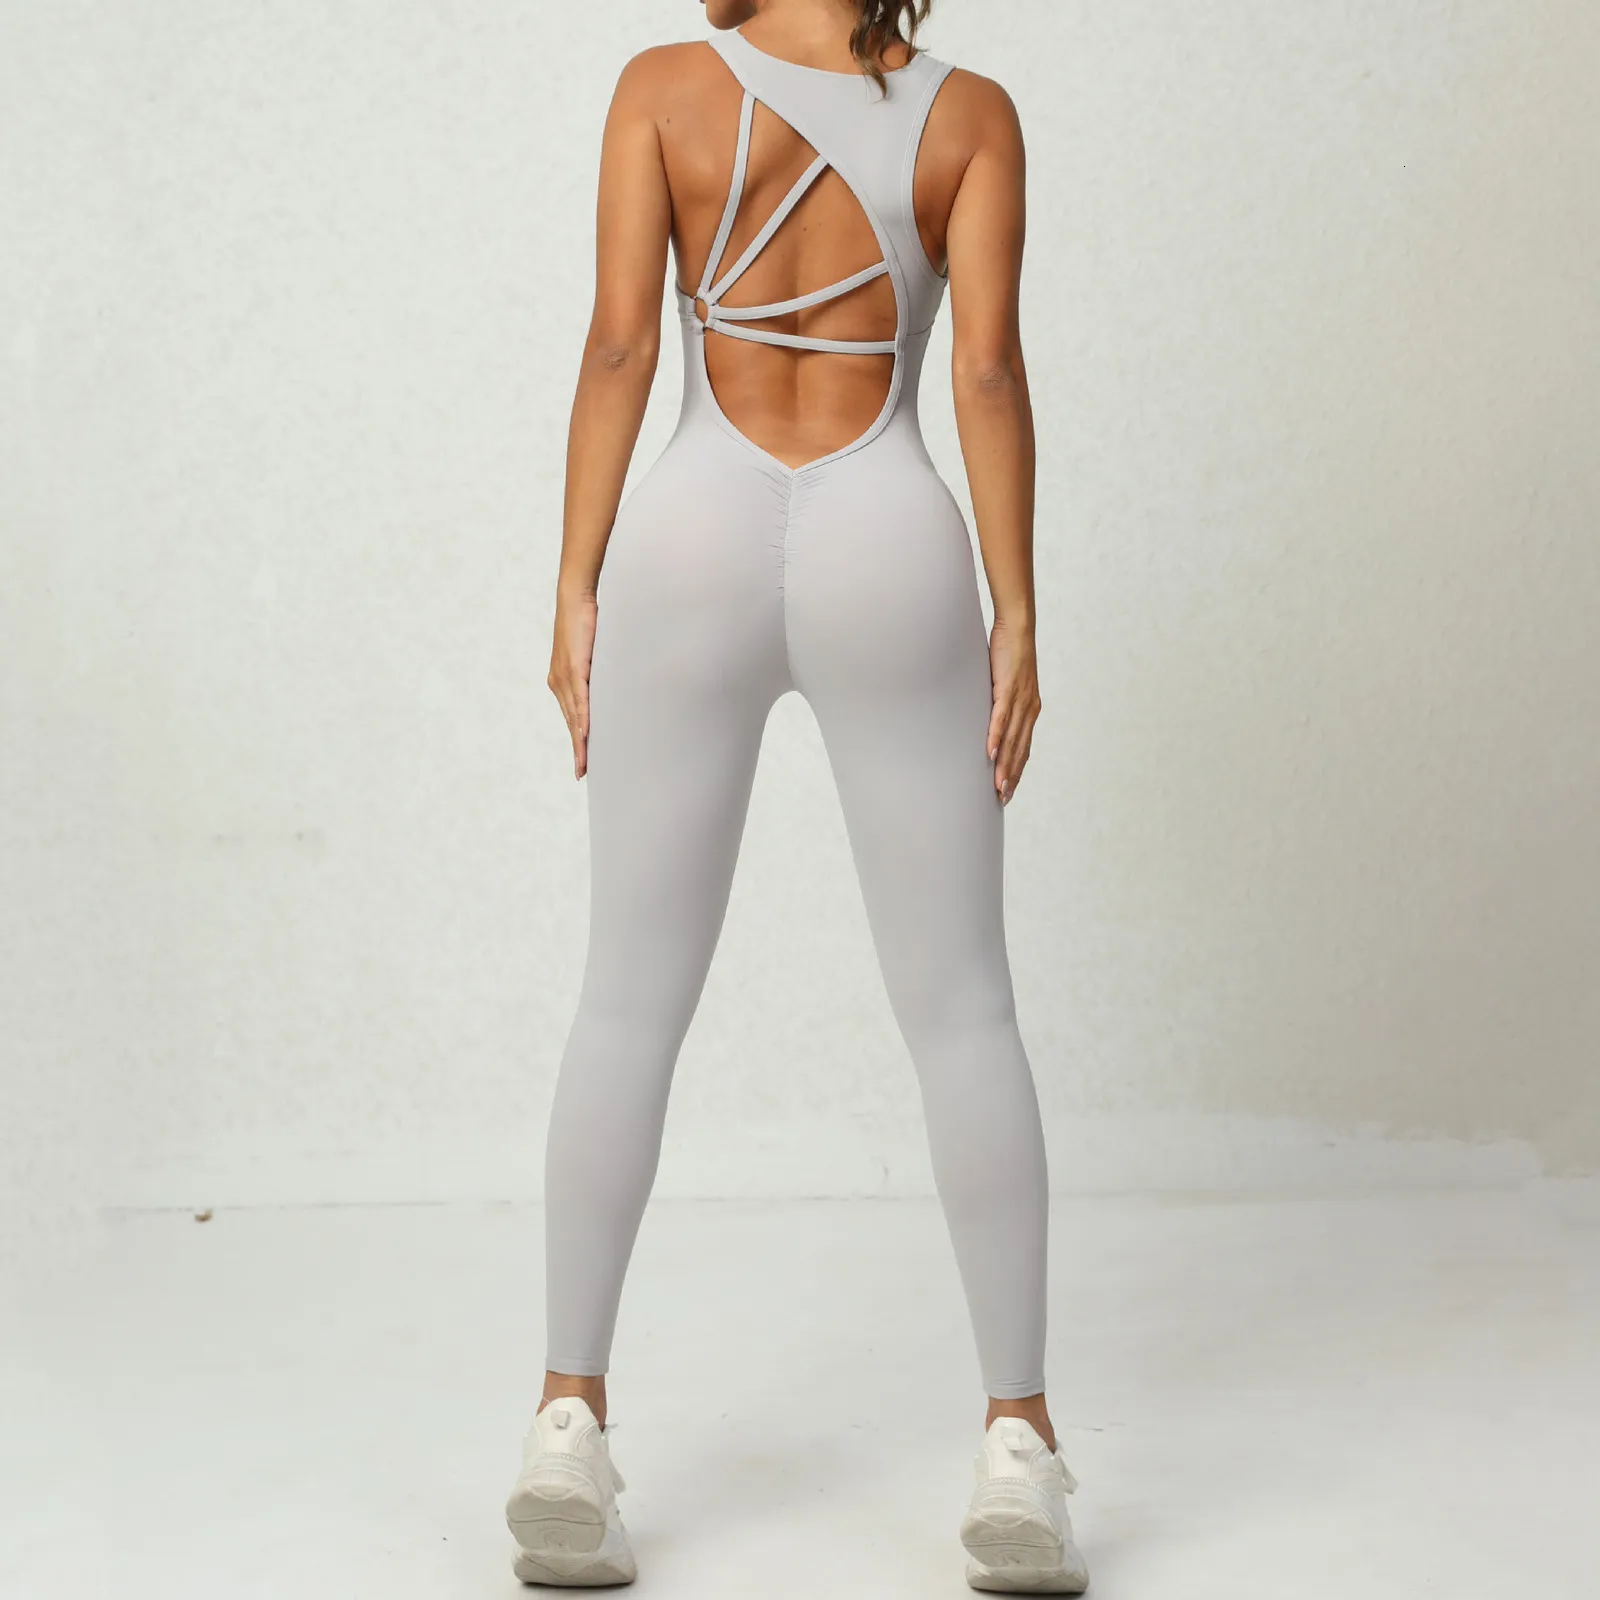 Backless Yoga Beyond Yoga Jumpsuit With Push Up Leggings And Cutout Top  Womens Sport Overalls For Fitness And Active Wear From You09, $34.49